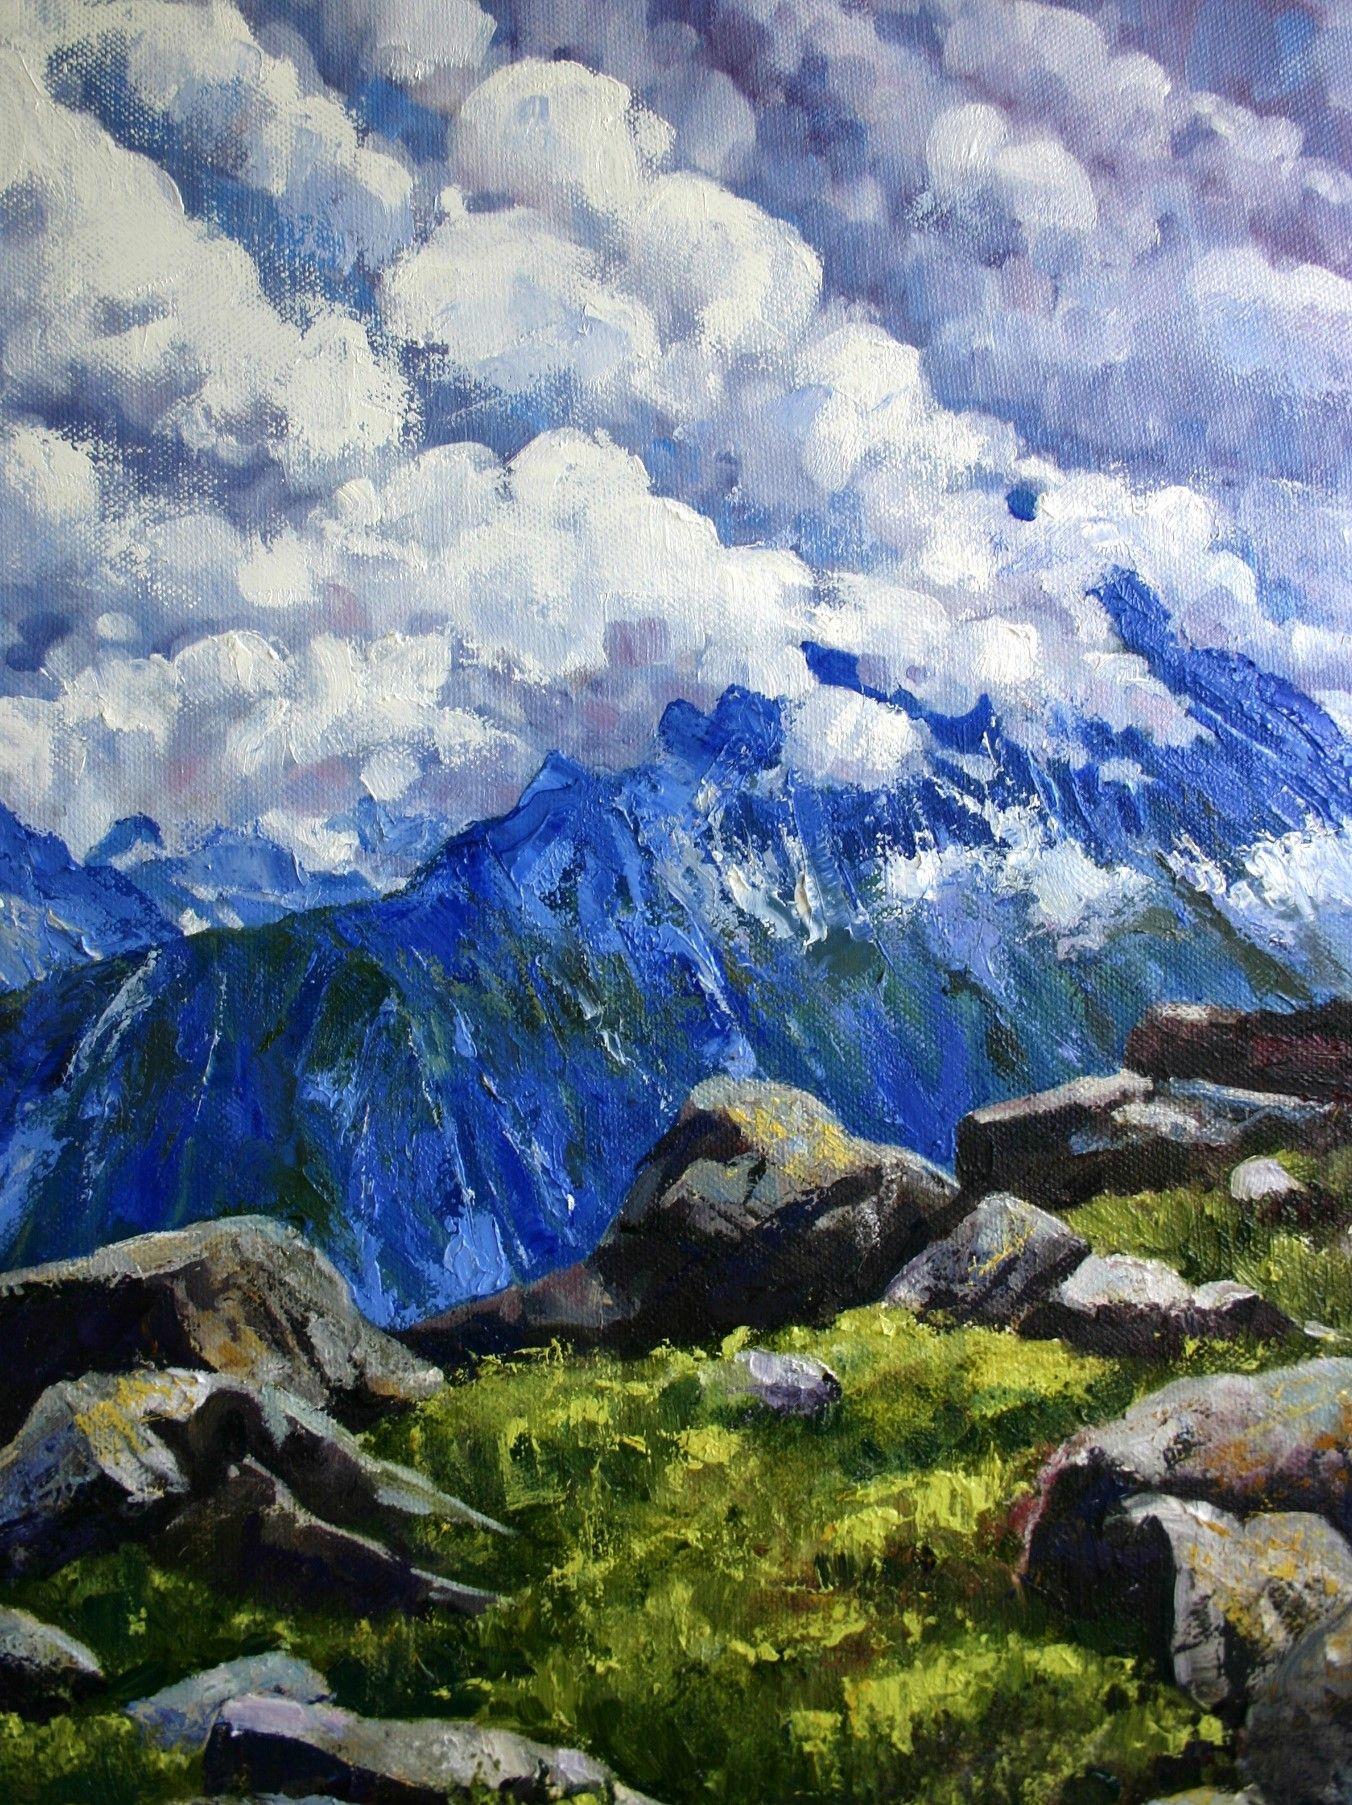 Modern contemporary impressionism.    Alpine landscape oil painting on cotton canvas.    A holiday to the French and Italian Alps has inspired a collection of mountain paintings.    This painting was inspired by the striking contrast between